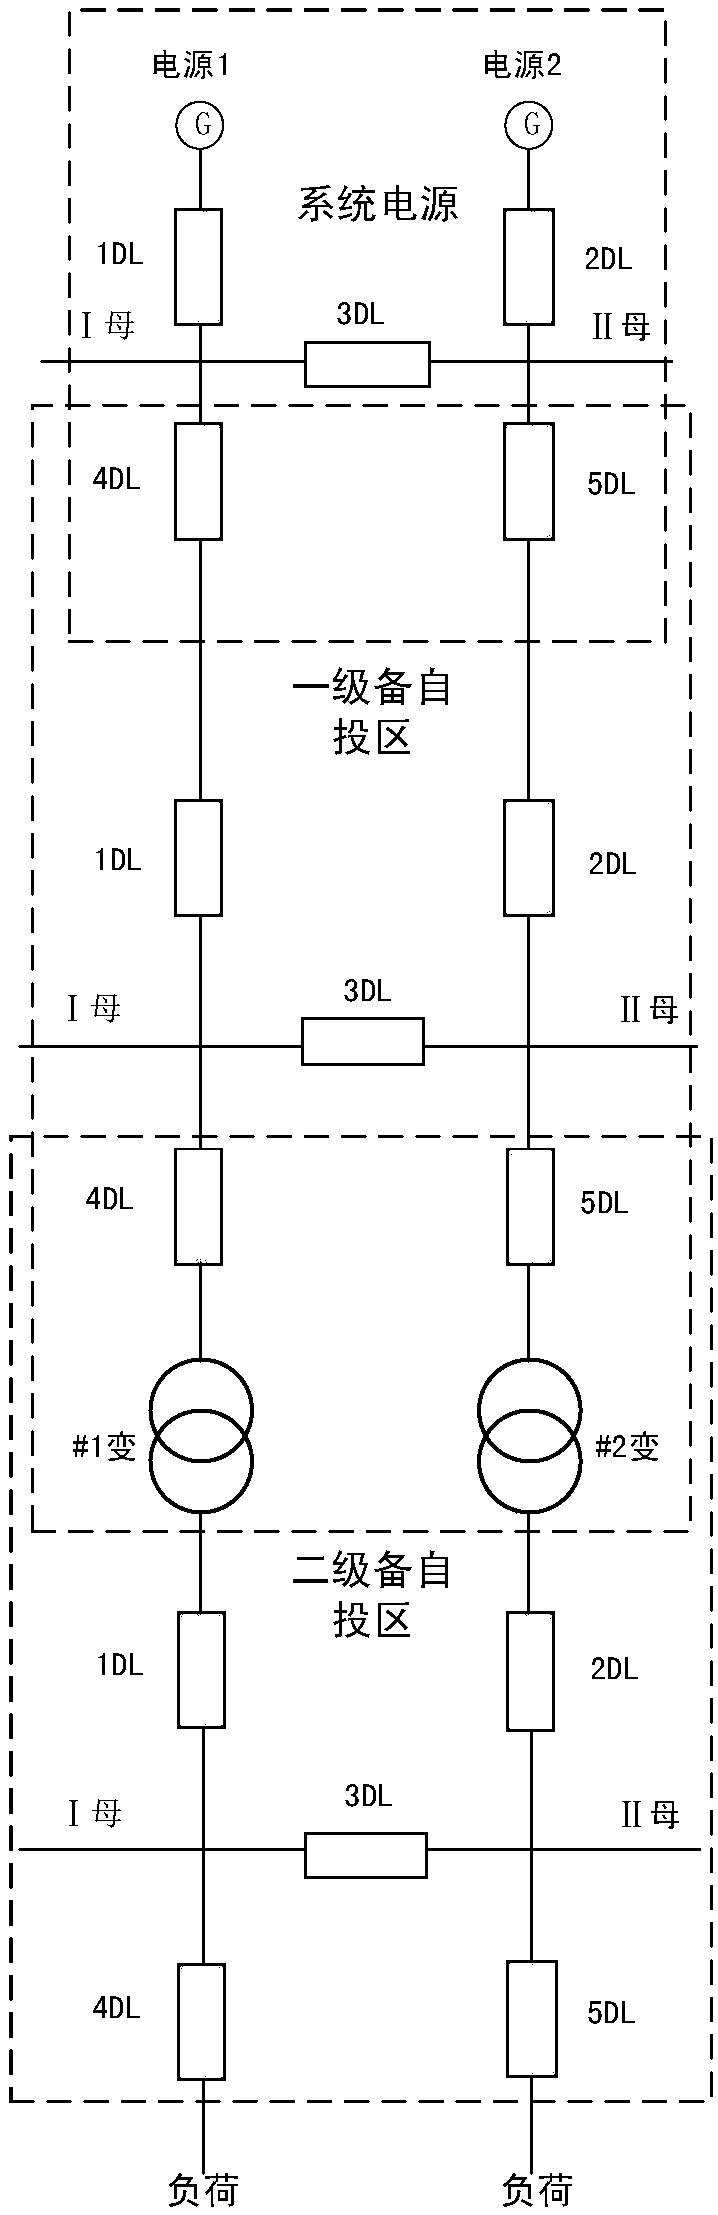 Reserved auto-switch-on method requiring free setting of fixed value based on trend direction partition topology